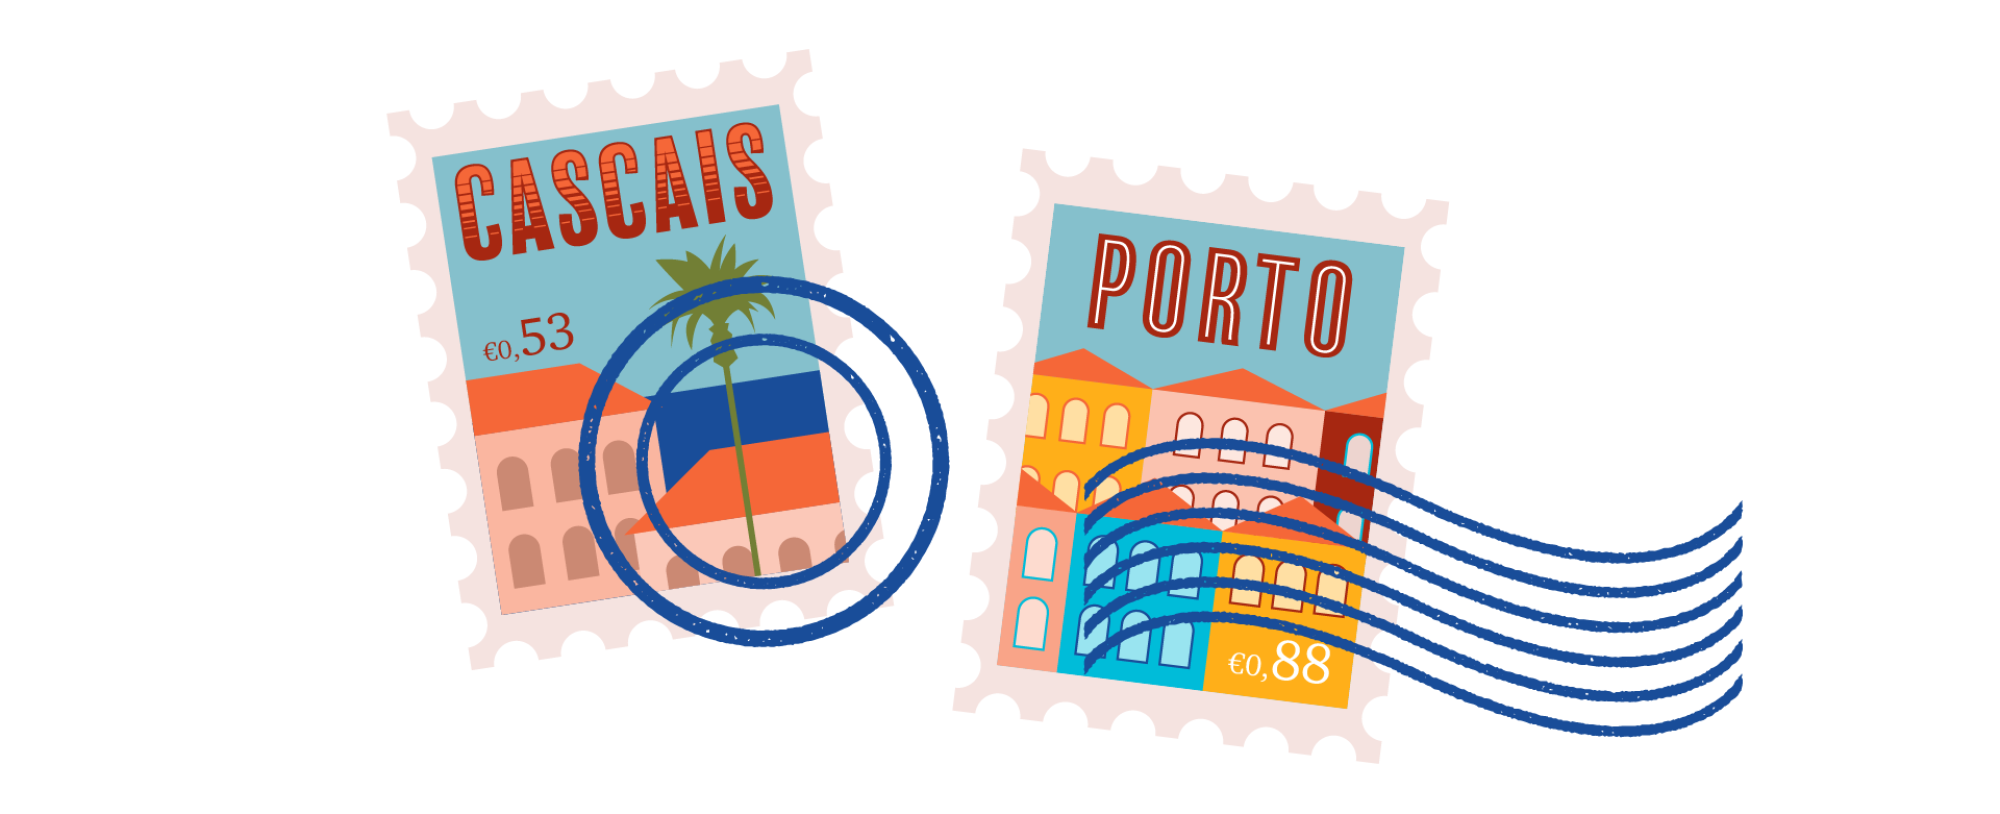 postage stamps for Cascais and Porto, Portugal, illustrated with colorful buildings